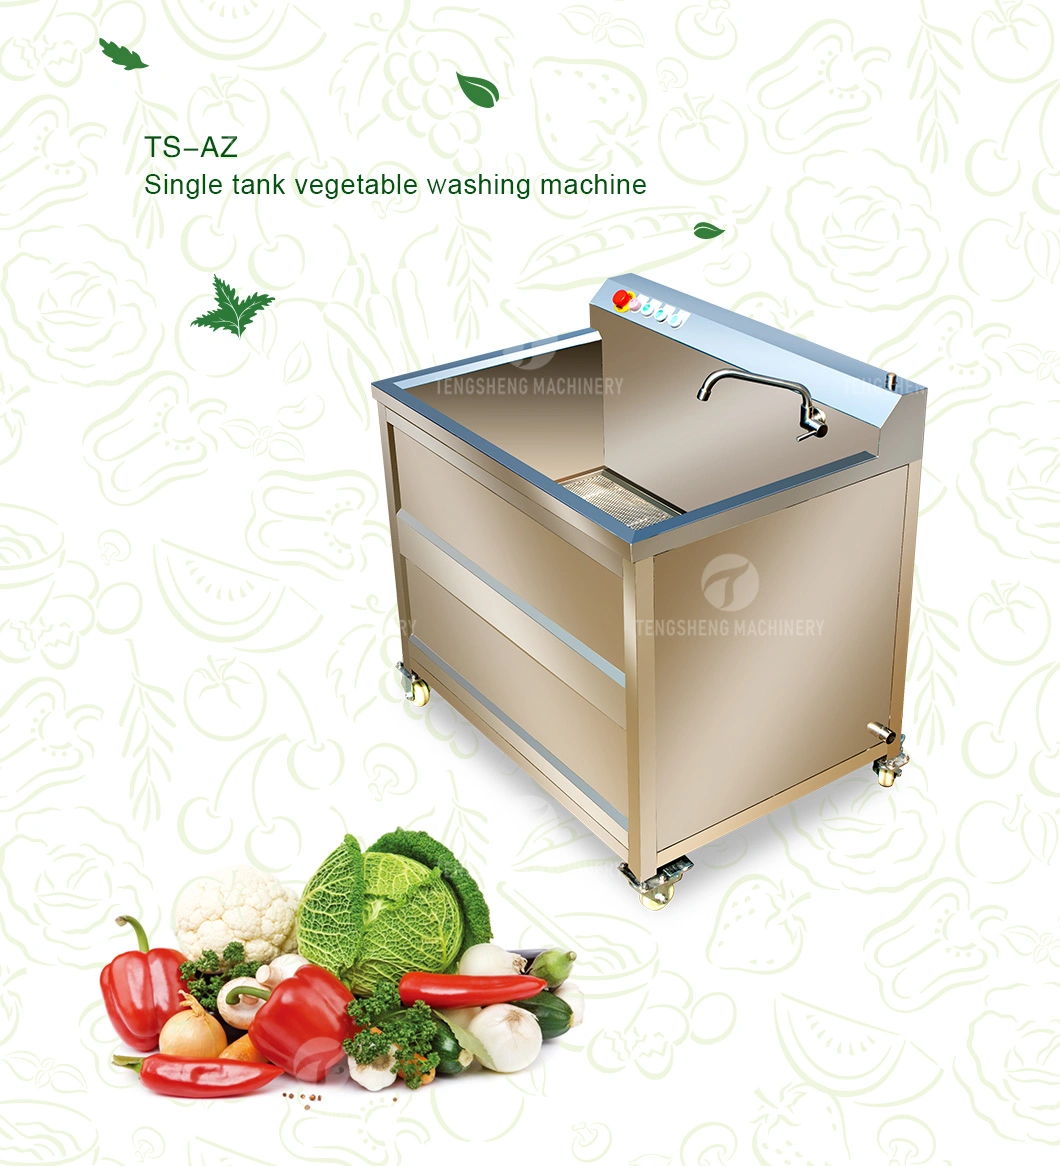 Ozone Sterilizing Cleaning Machine for Fruits and Vegetables Commercial Multifunctional Sea Products Washing Machine (TS-AZ)